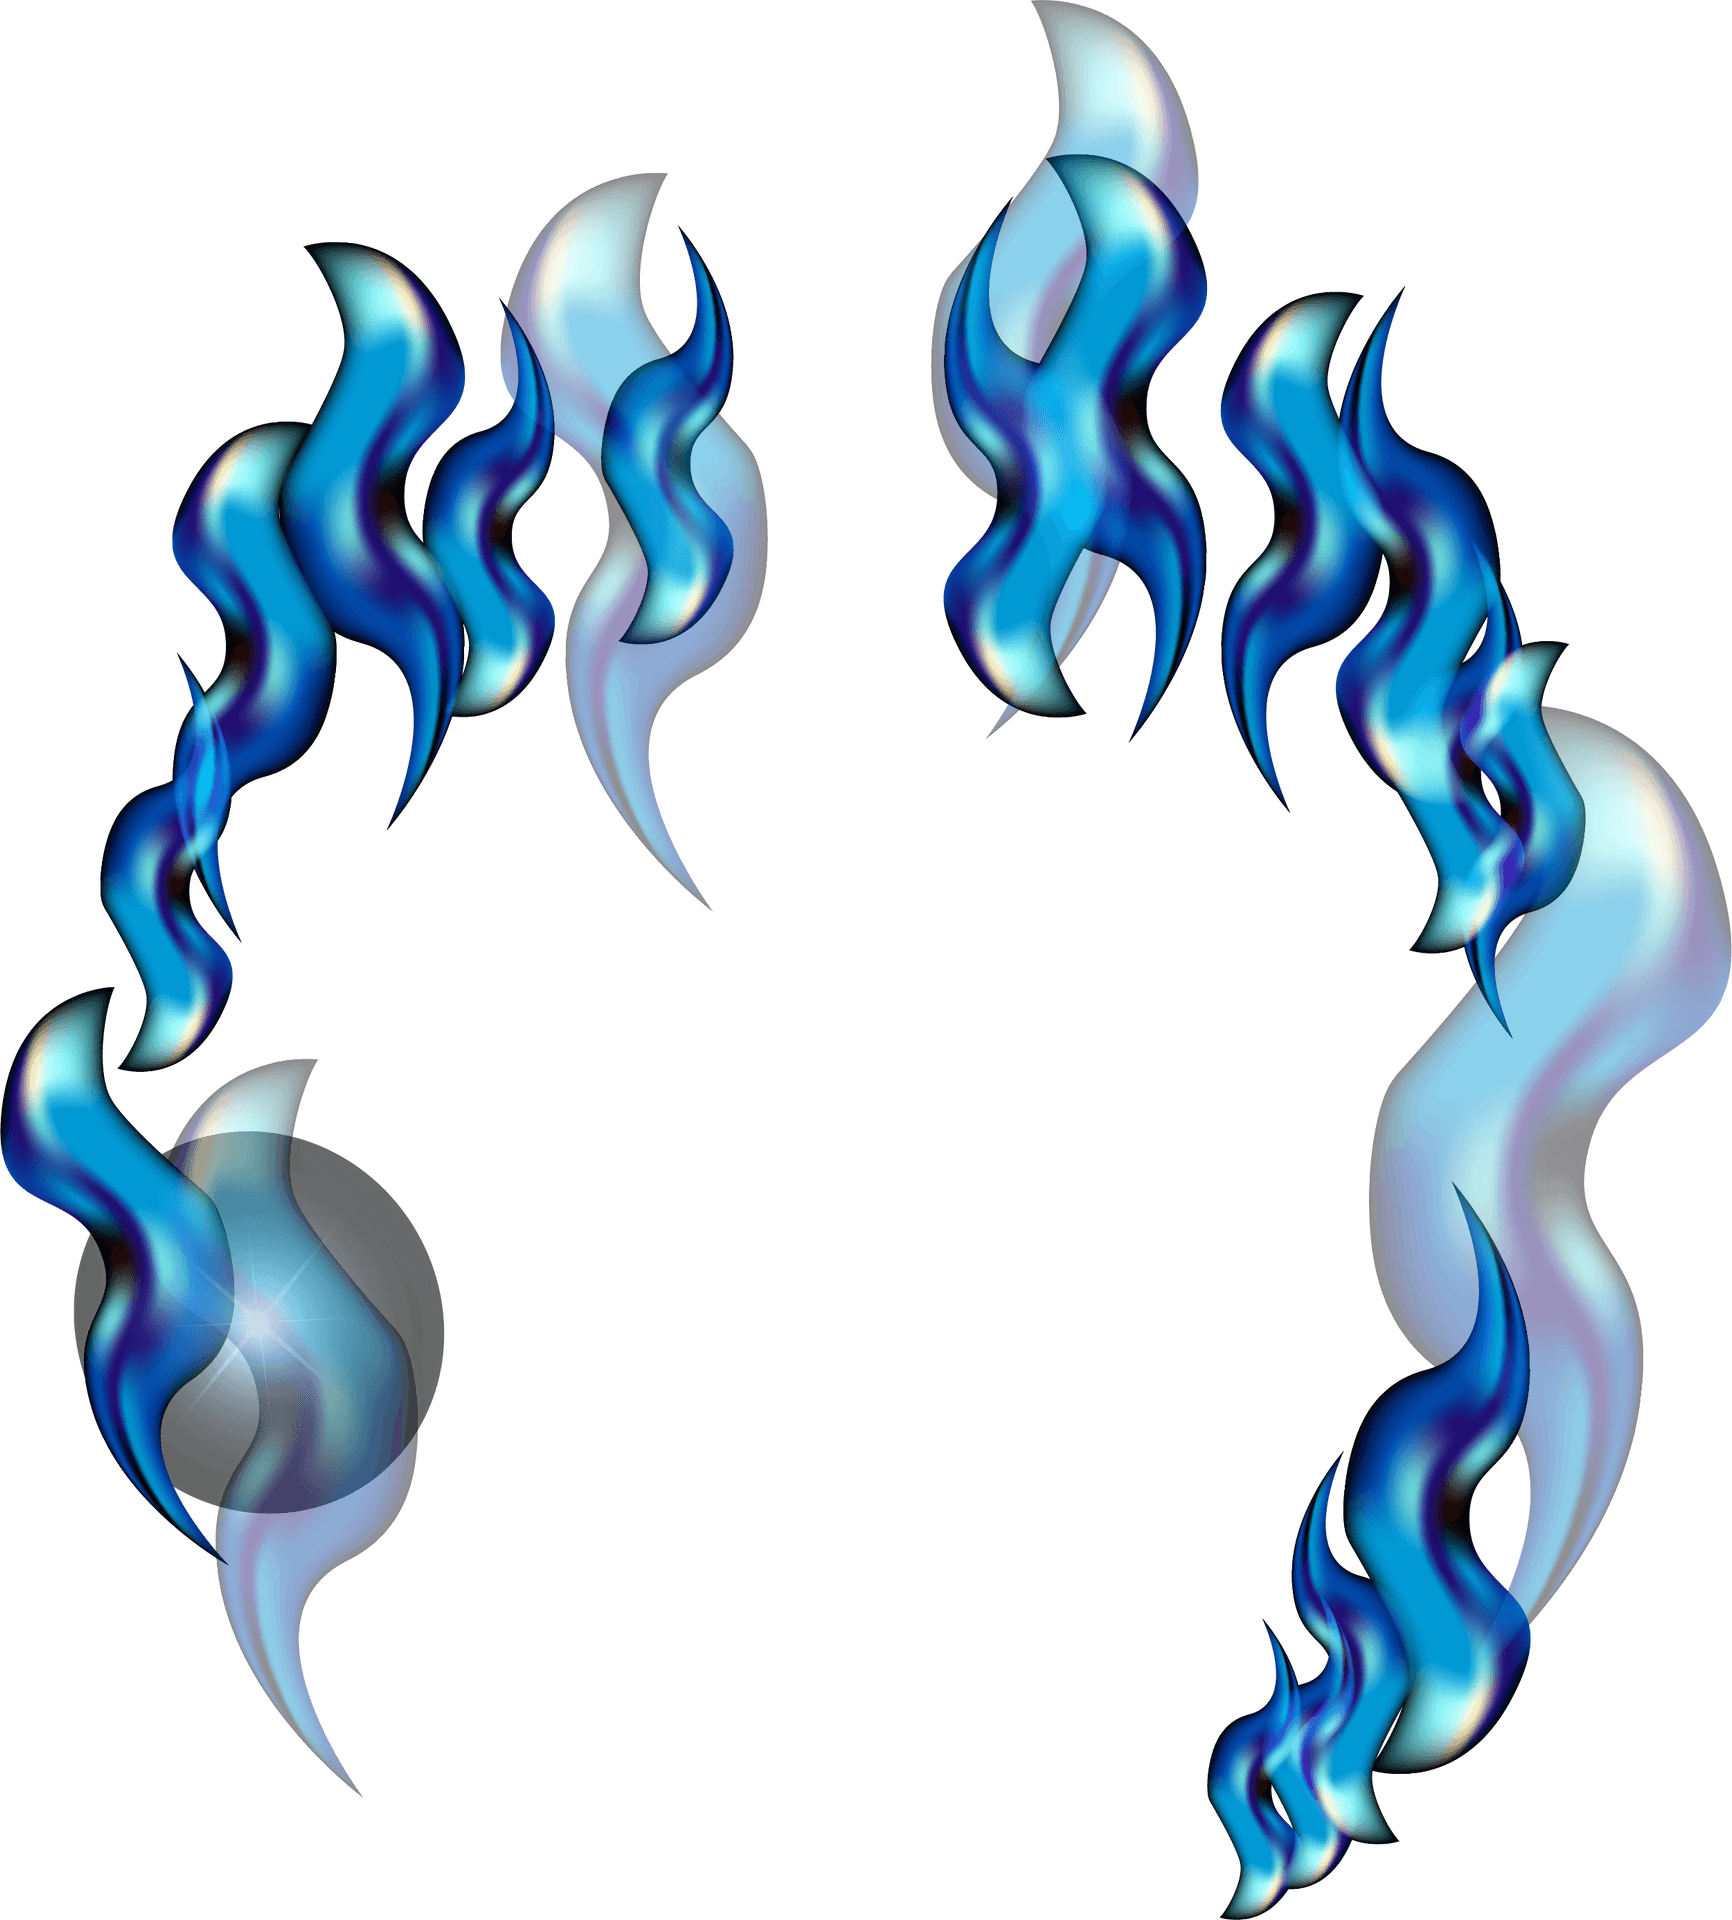 Abstract Blue Flame Design PNG image